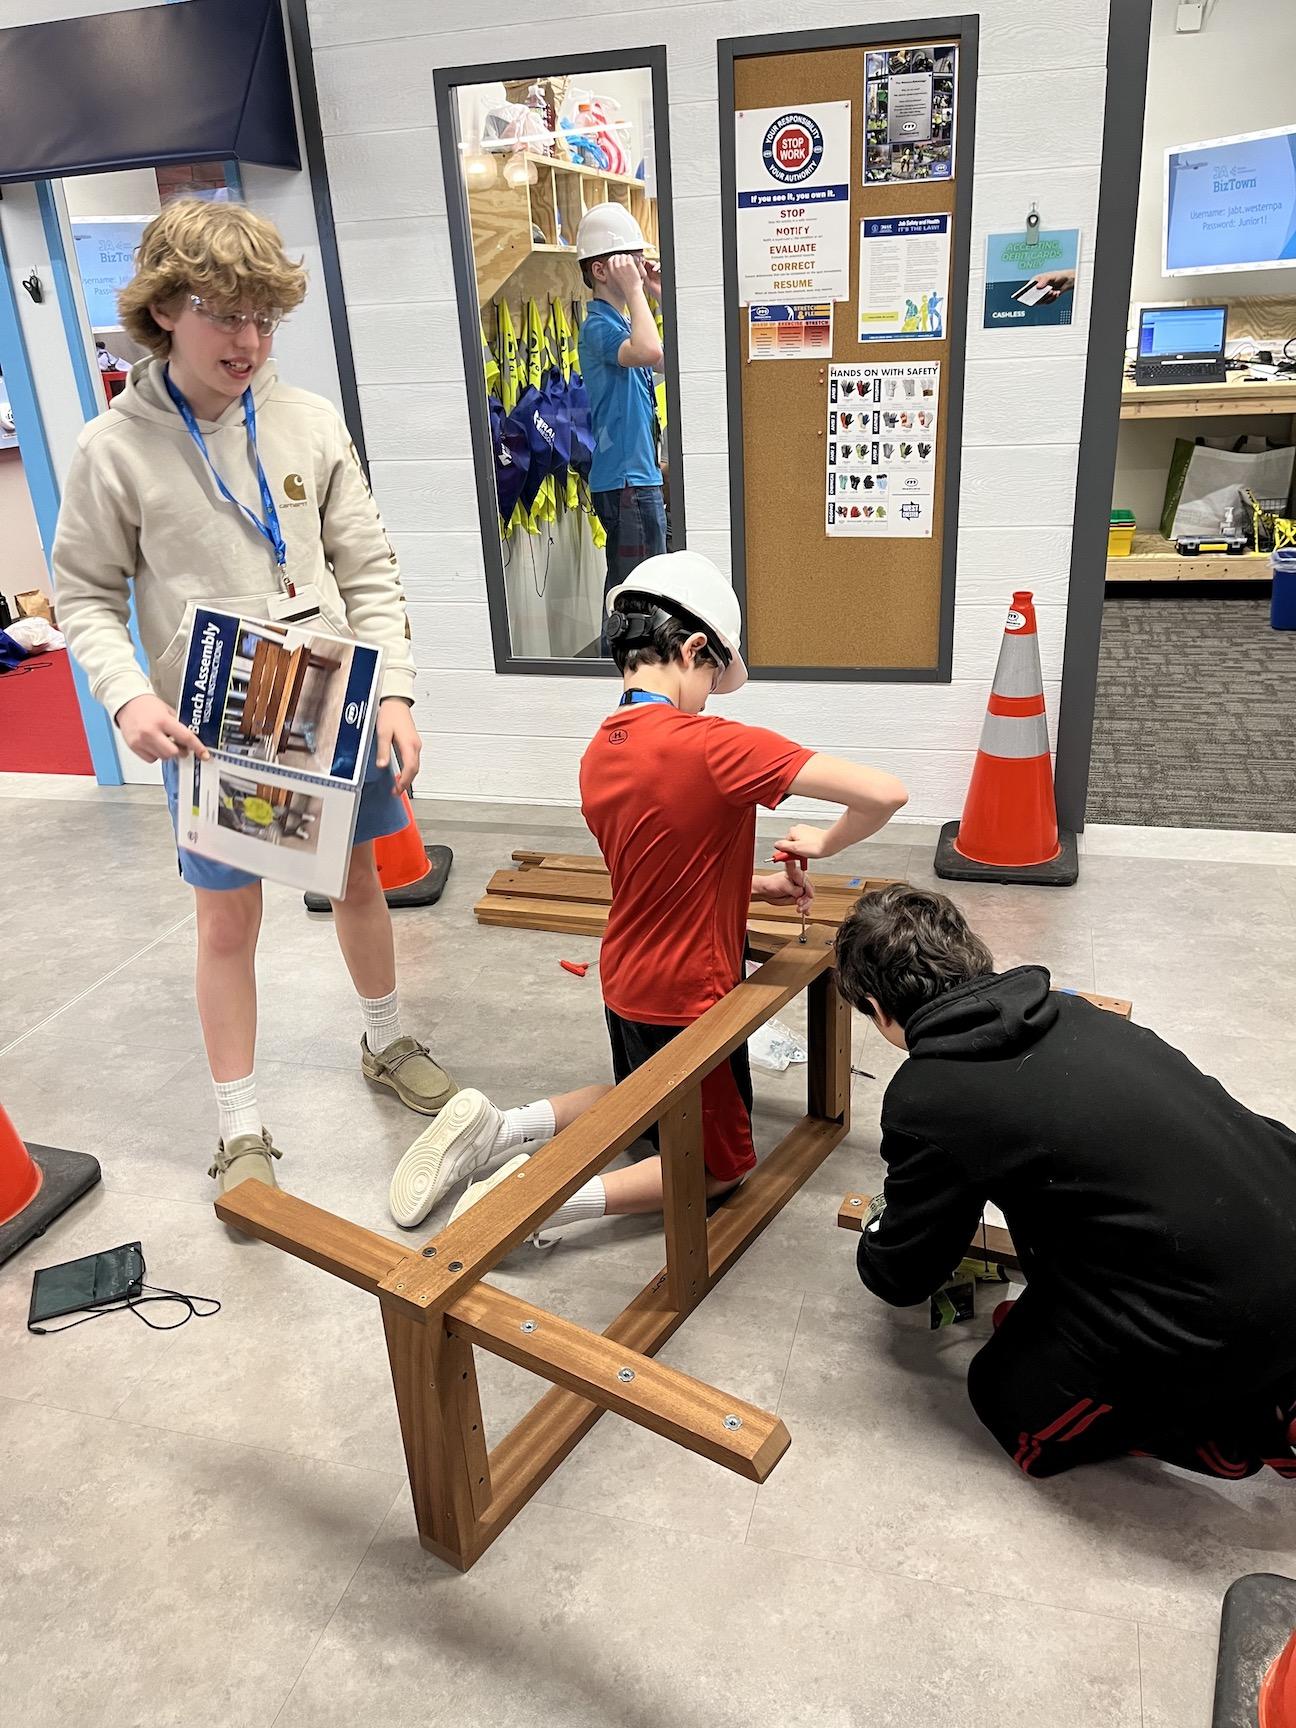 Students role play as Mascaro Construction workers: Brady Bianco, Antonio Caruso, and Jude Montano